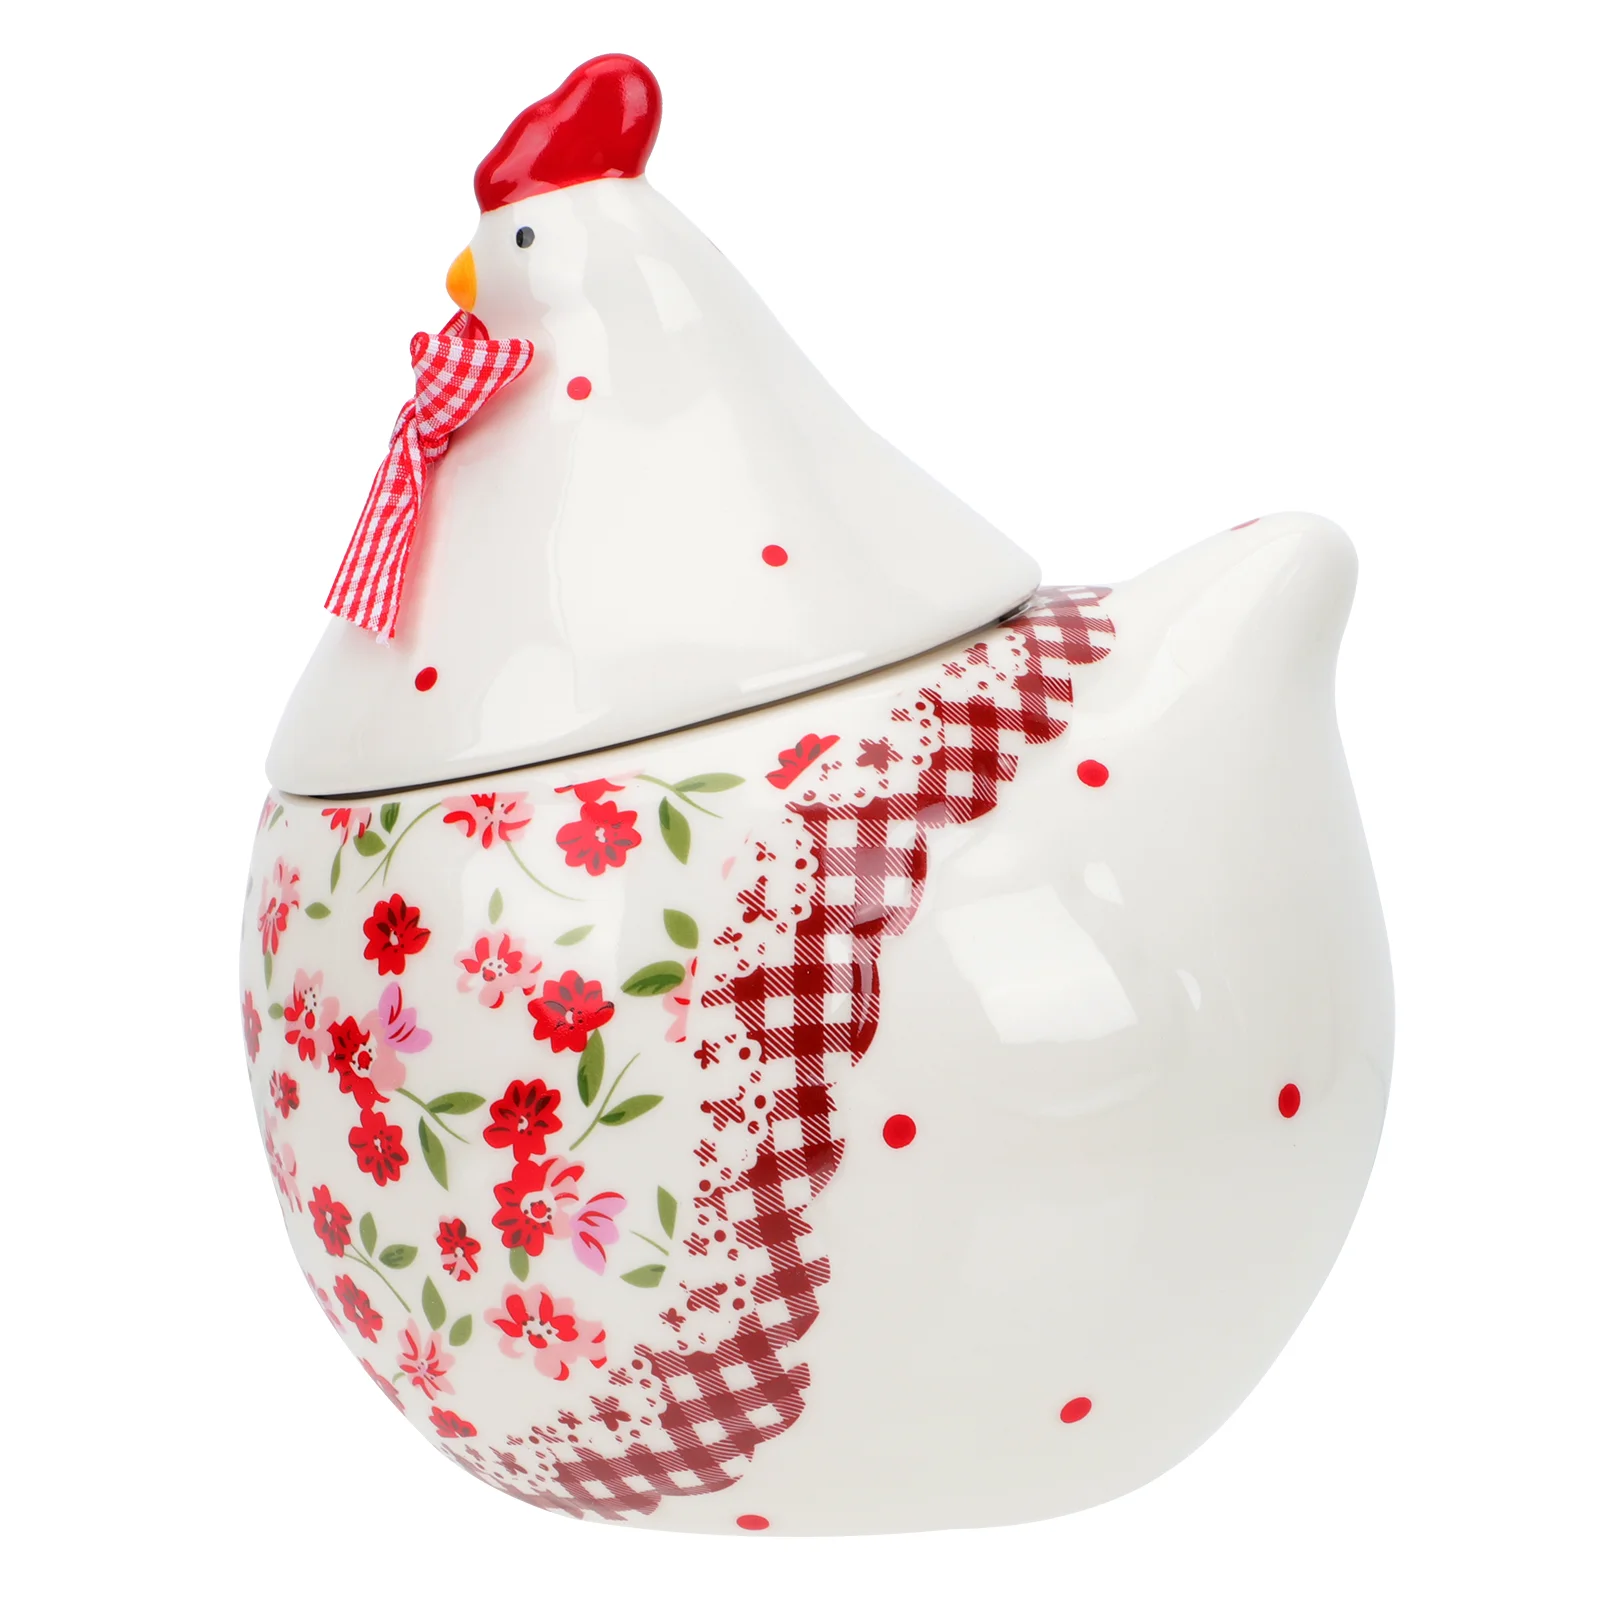 

Jar Ceramic Storage Canister Container Eastercookie Candy Kitchen Egg Tea Hen Coffee Porcelain Airtight Chicken Lid Holder